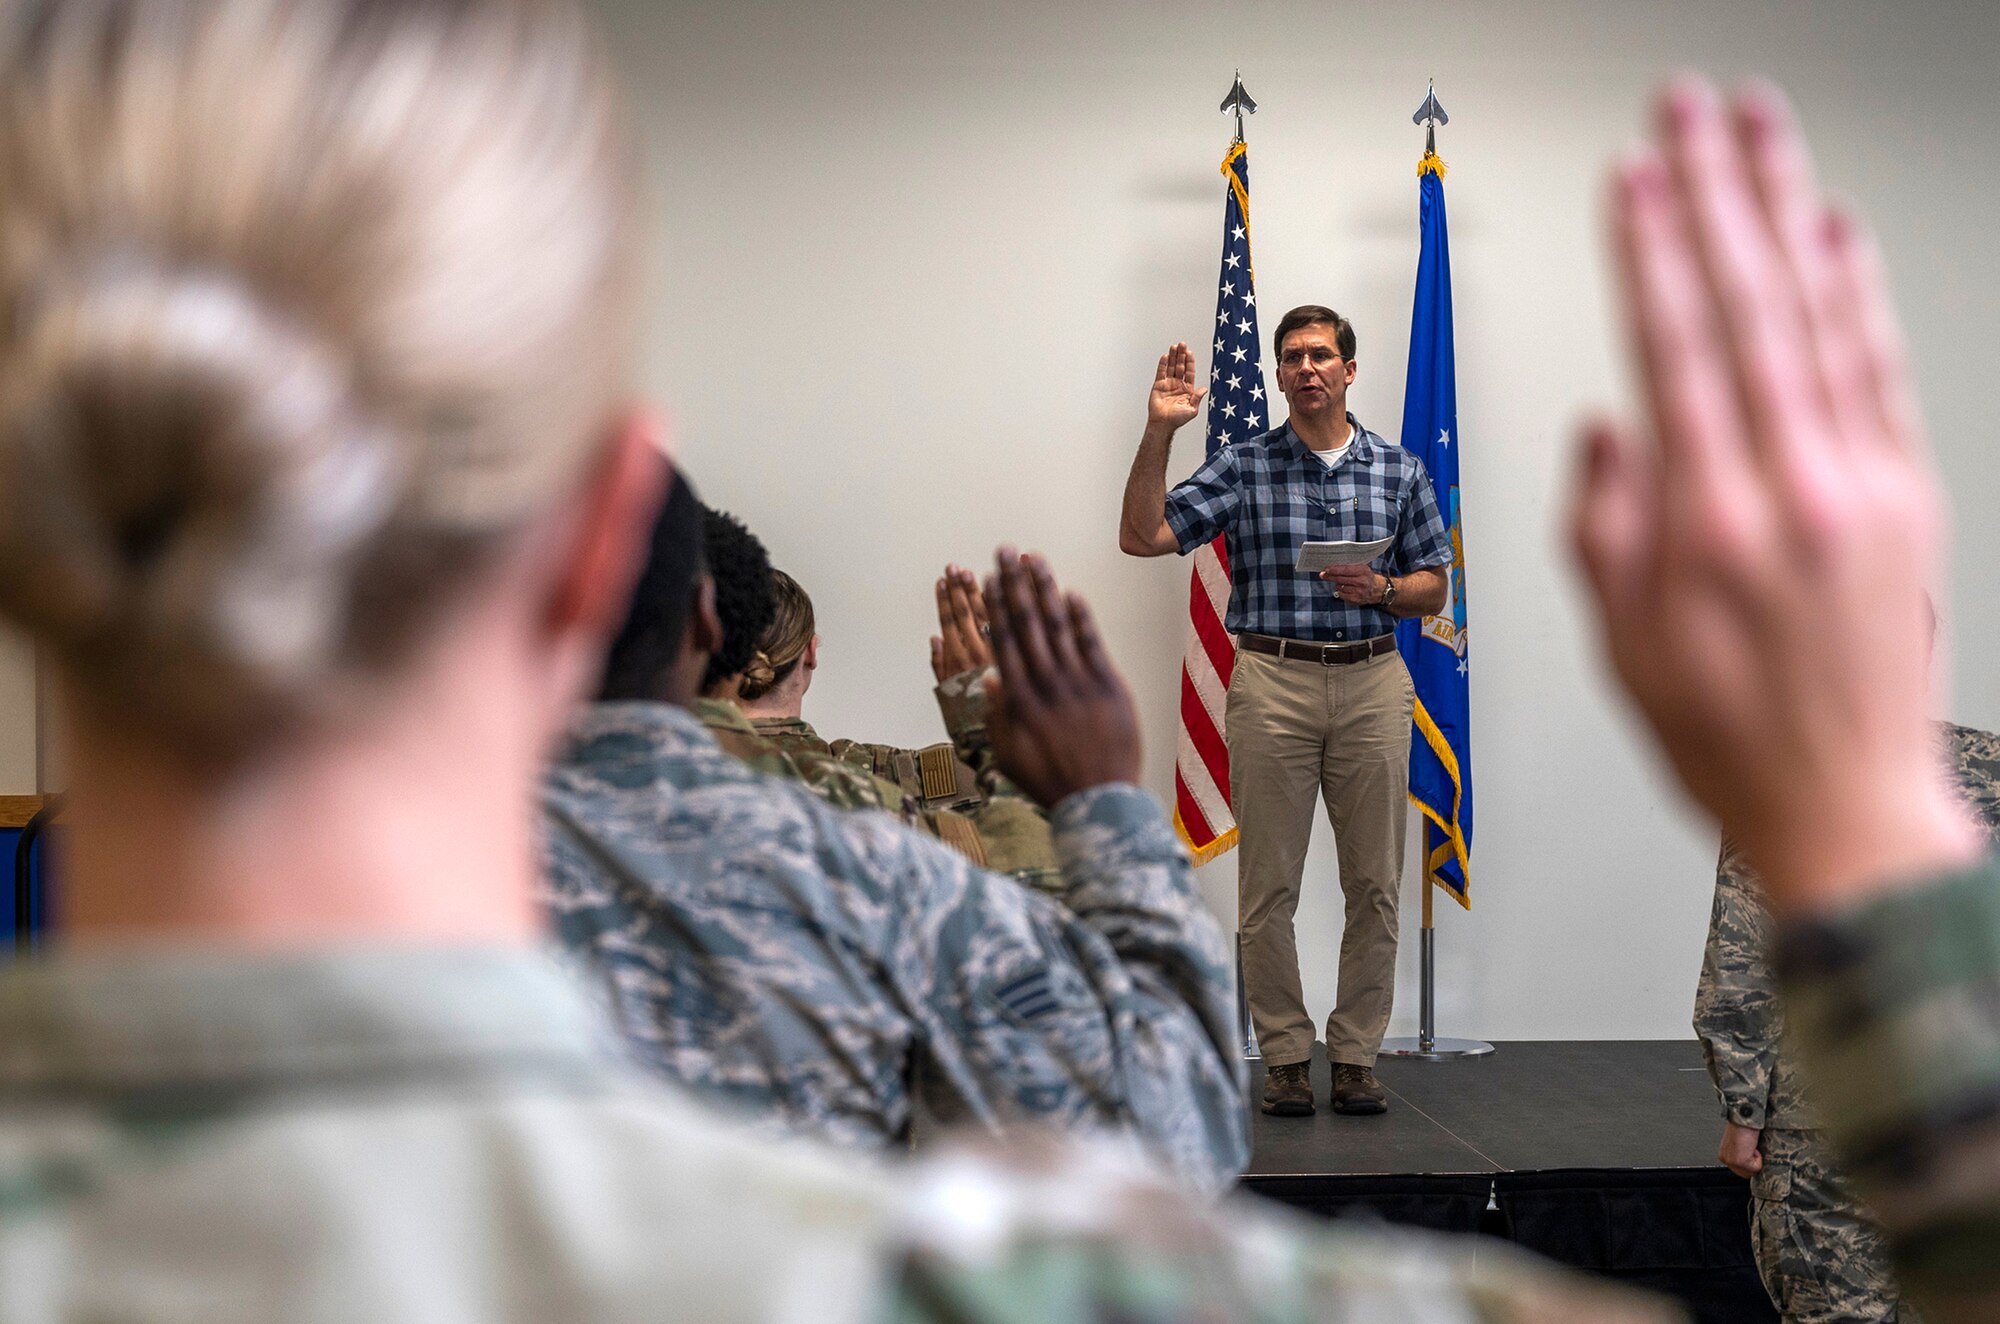 U.S. Secretary of Defense Dr. Mark T. Esper administers the oath of enlistment during his visit June 16, 2020, at Joint Base San Antonio-Lackland, Texas. Esper met with AETC leaders to see firsthand how Basic Military Training is fighting through COVID-19 with health protection measures in place and adapting operations to current Centers for Disease Control and Prevention Guidance. The visit also allowed him to witness how a citizen becomes an Airman during COVID-19.